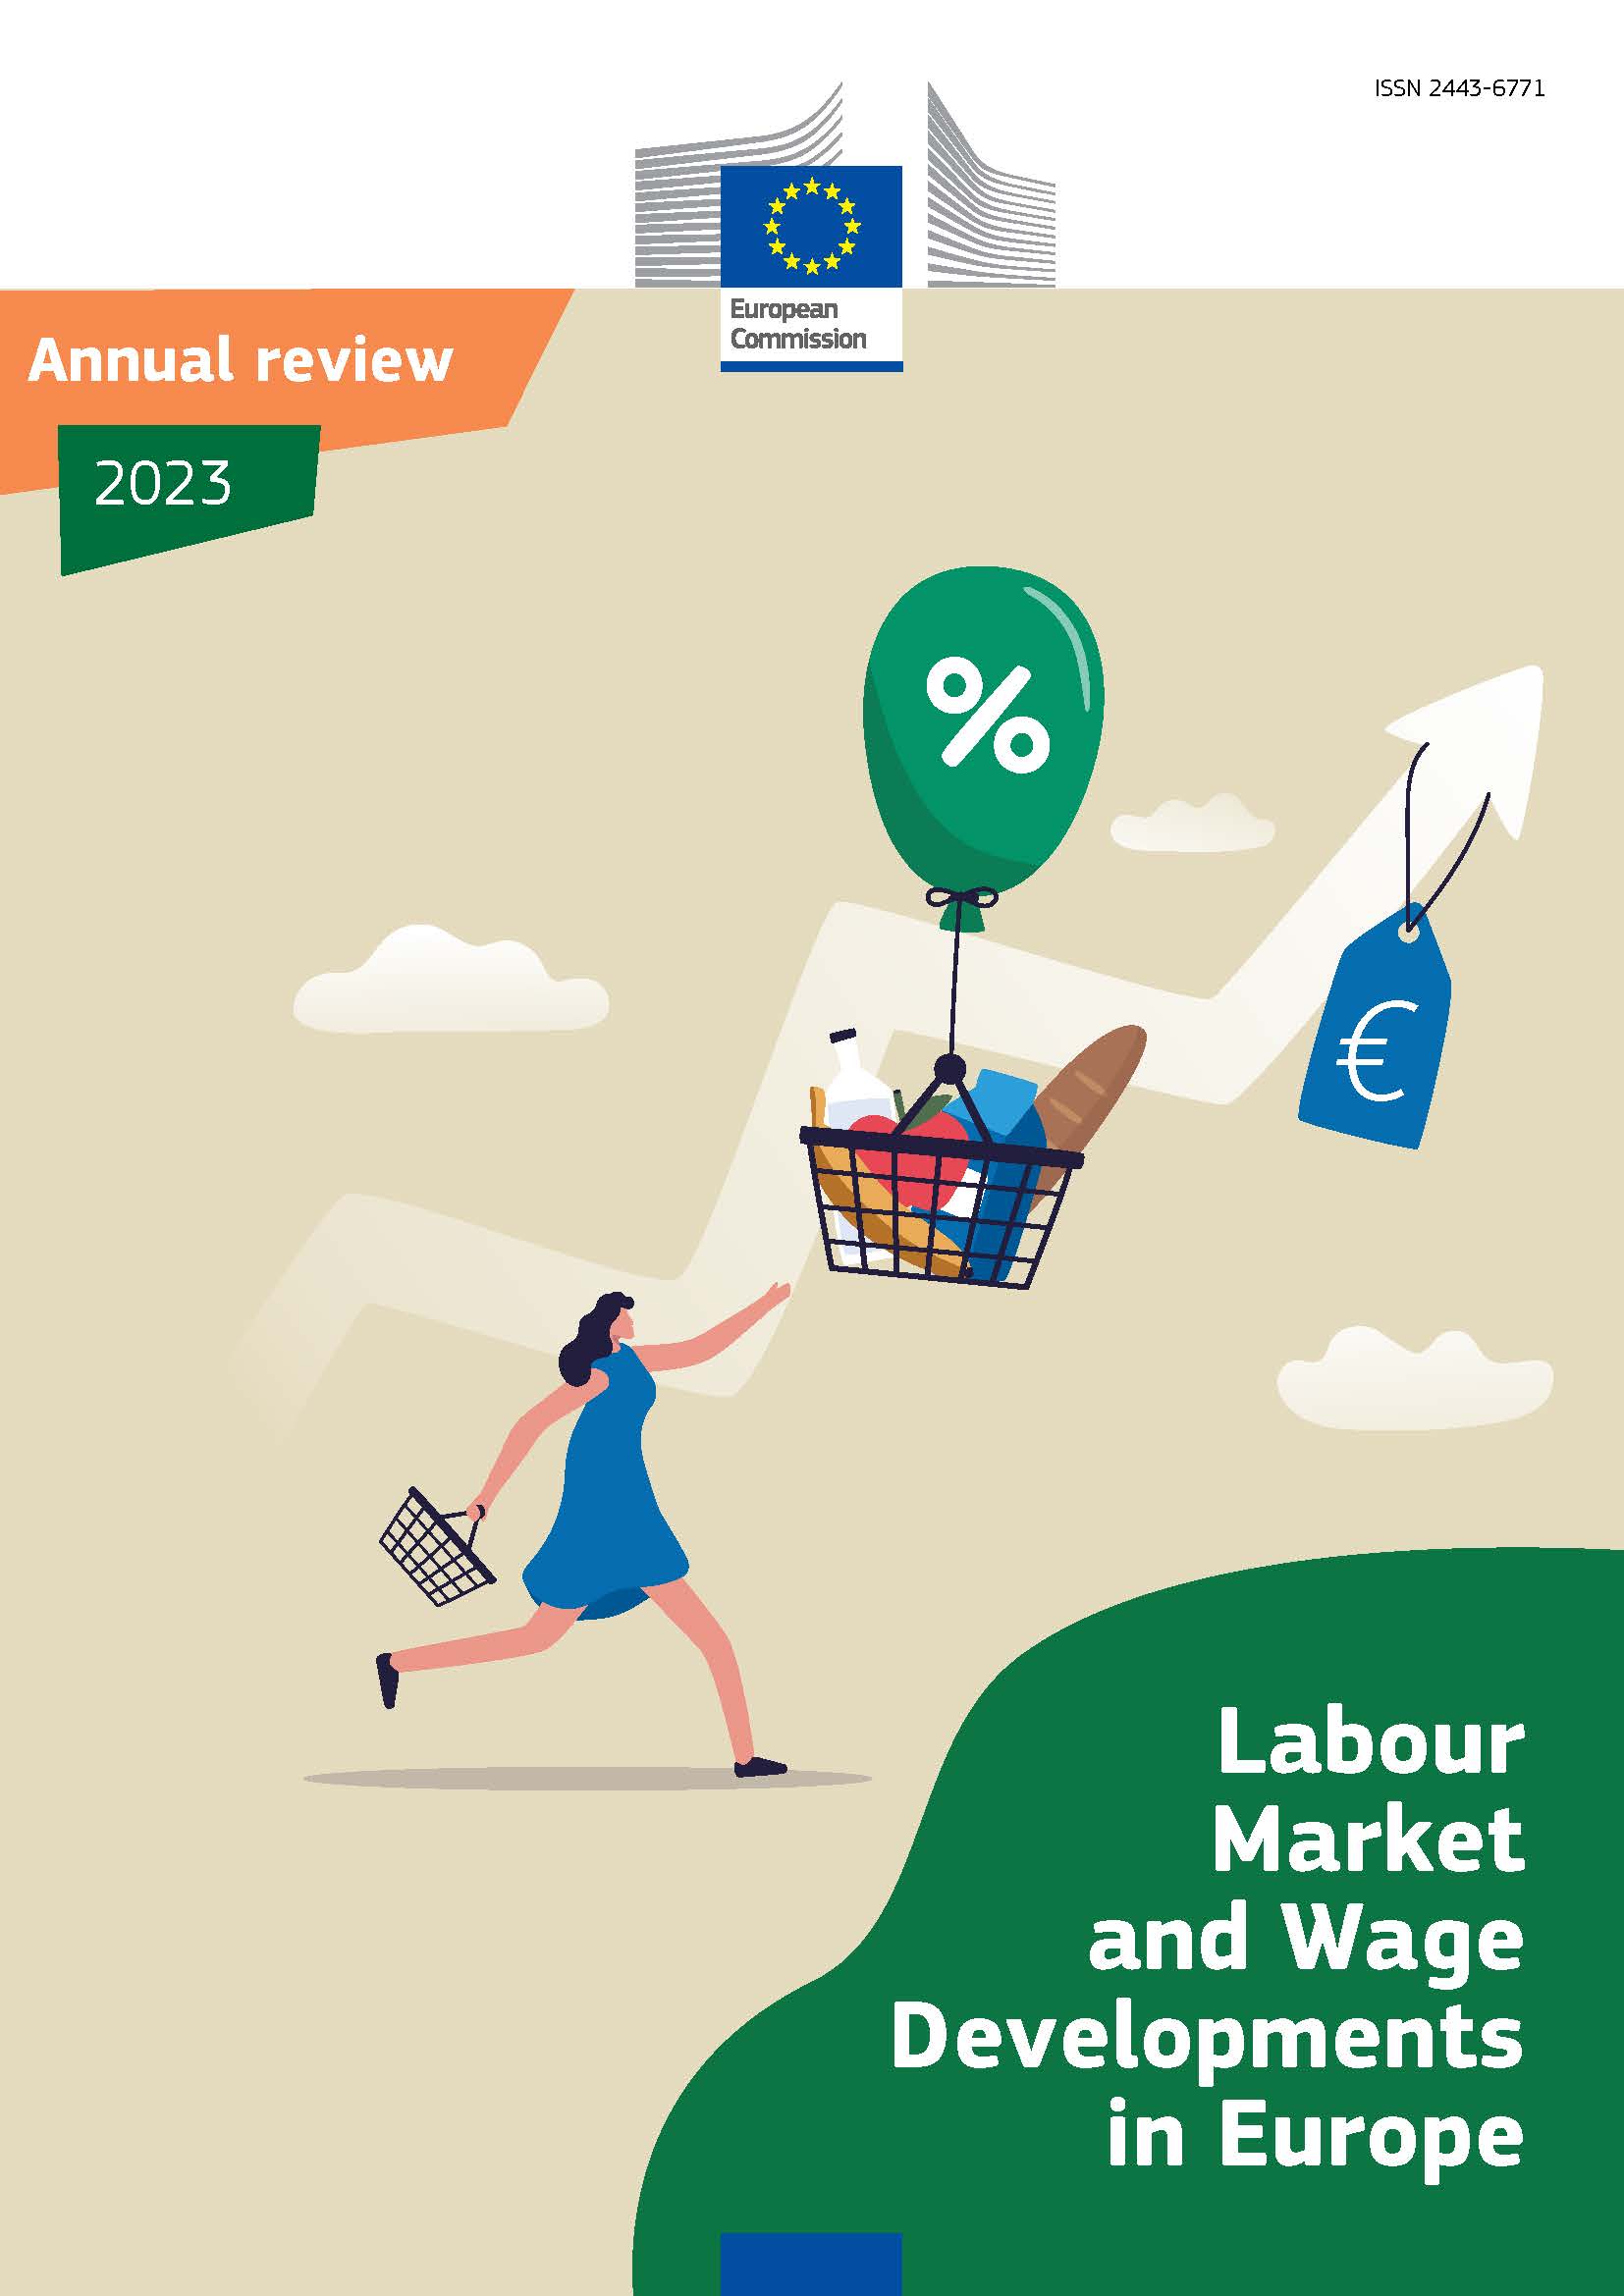 Labour Market and Wage Developments in Europe 2023